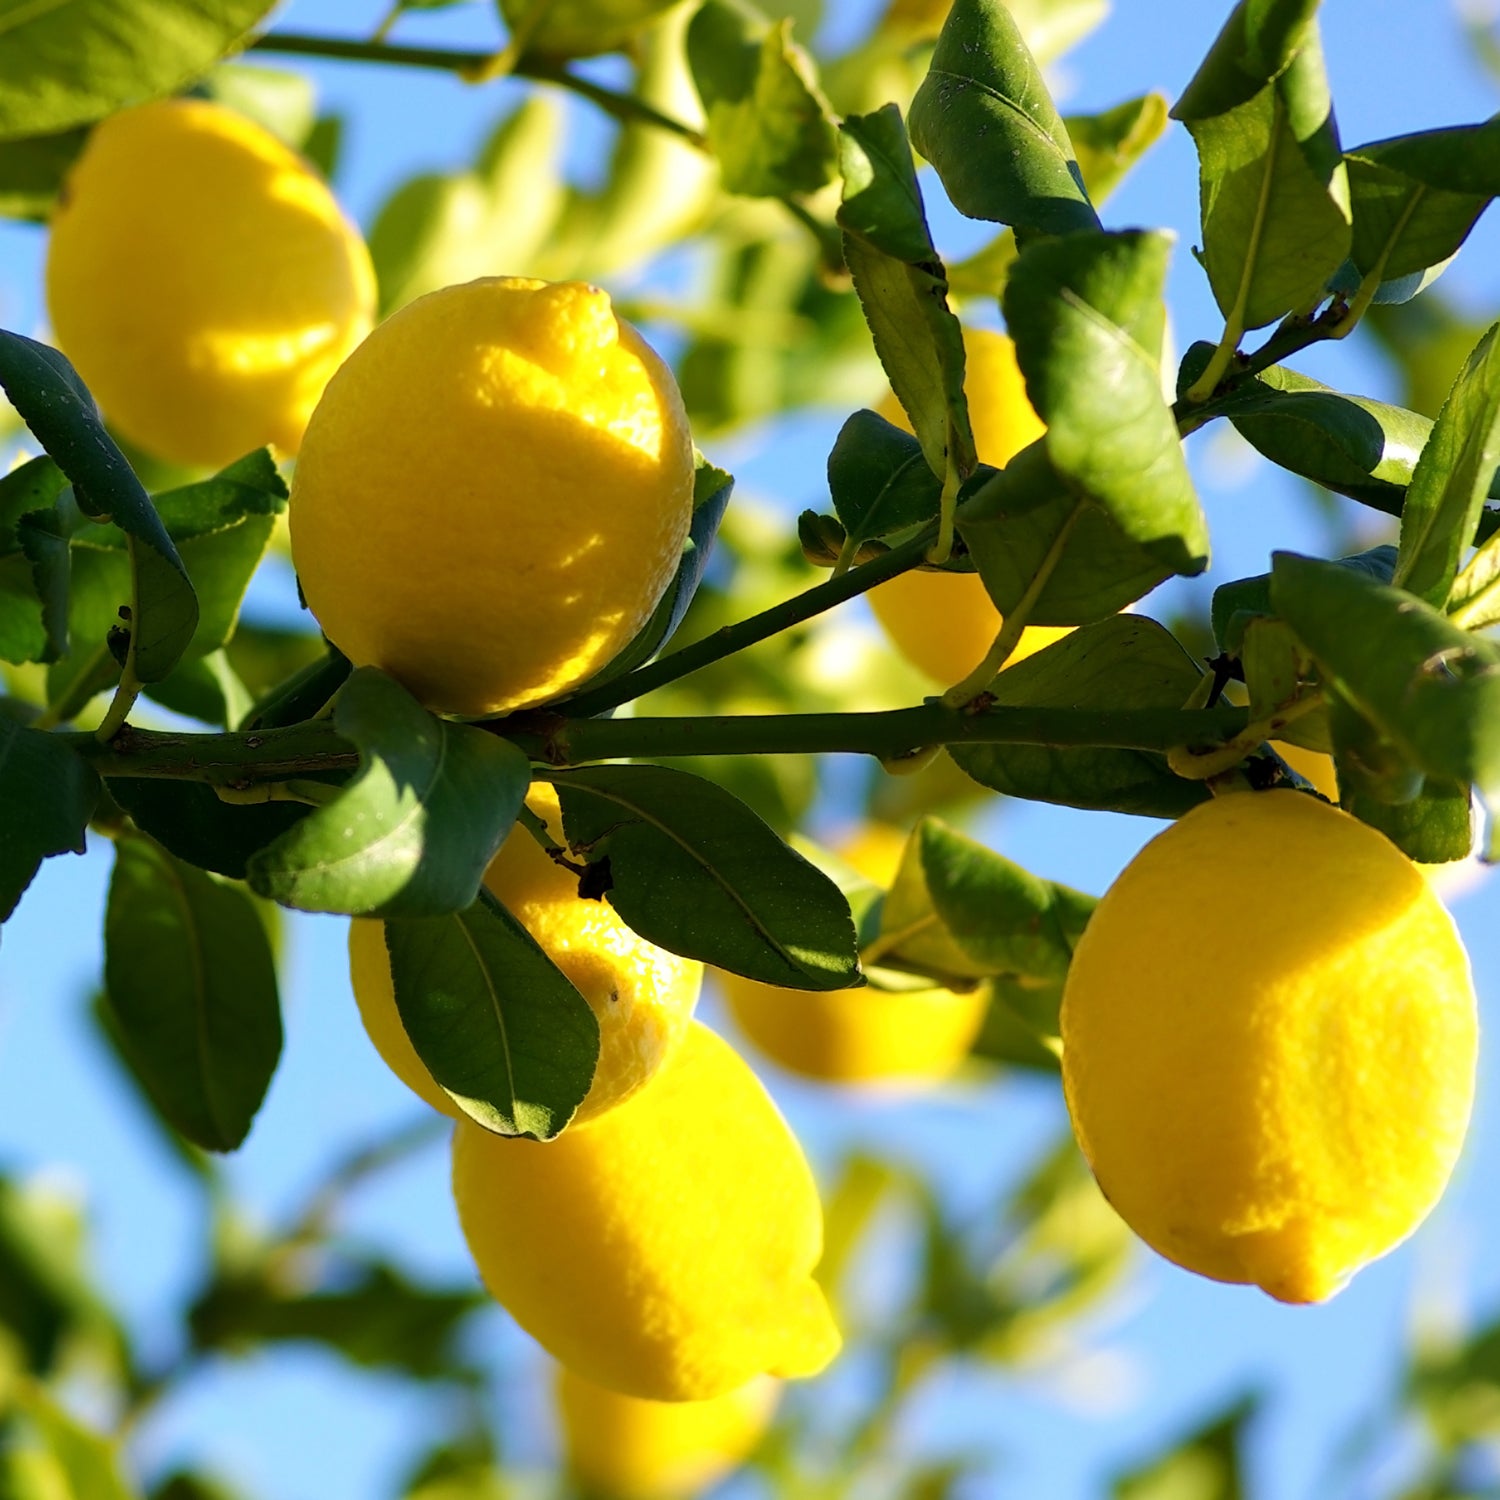 Lemons hanging from tree on a sunny day. Lemons like these are a key fragrance note in our "Sweet Tea" scented candle